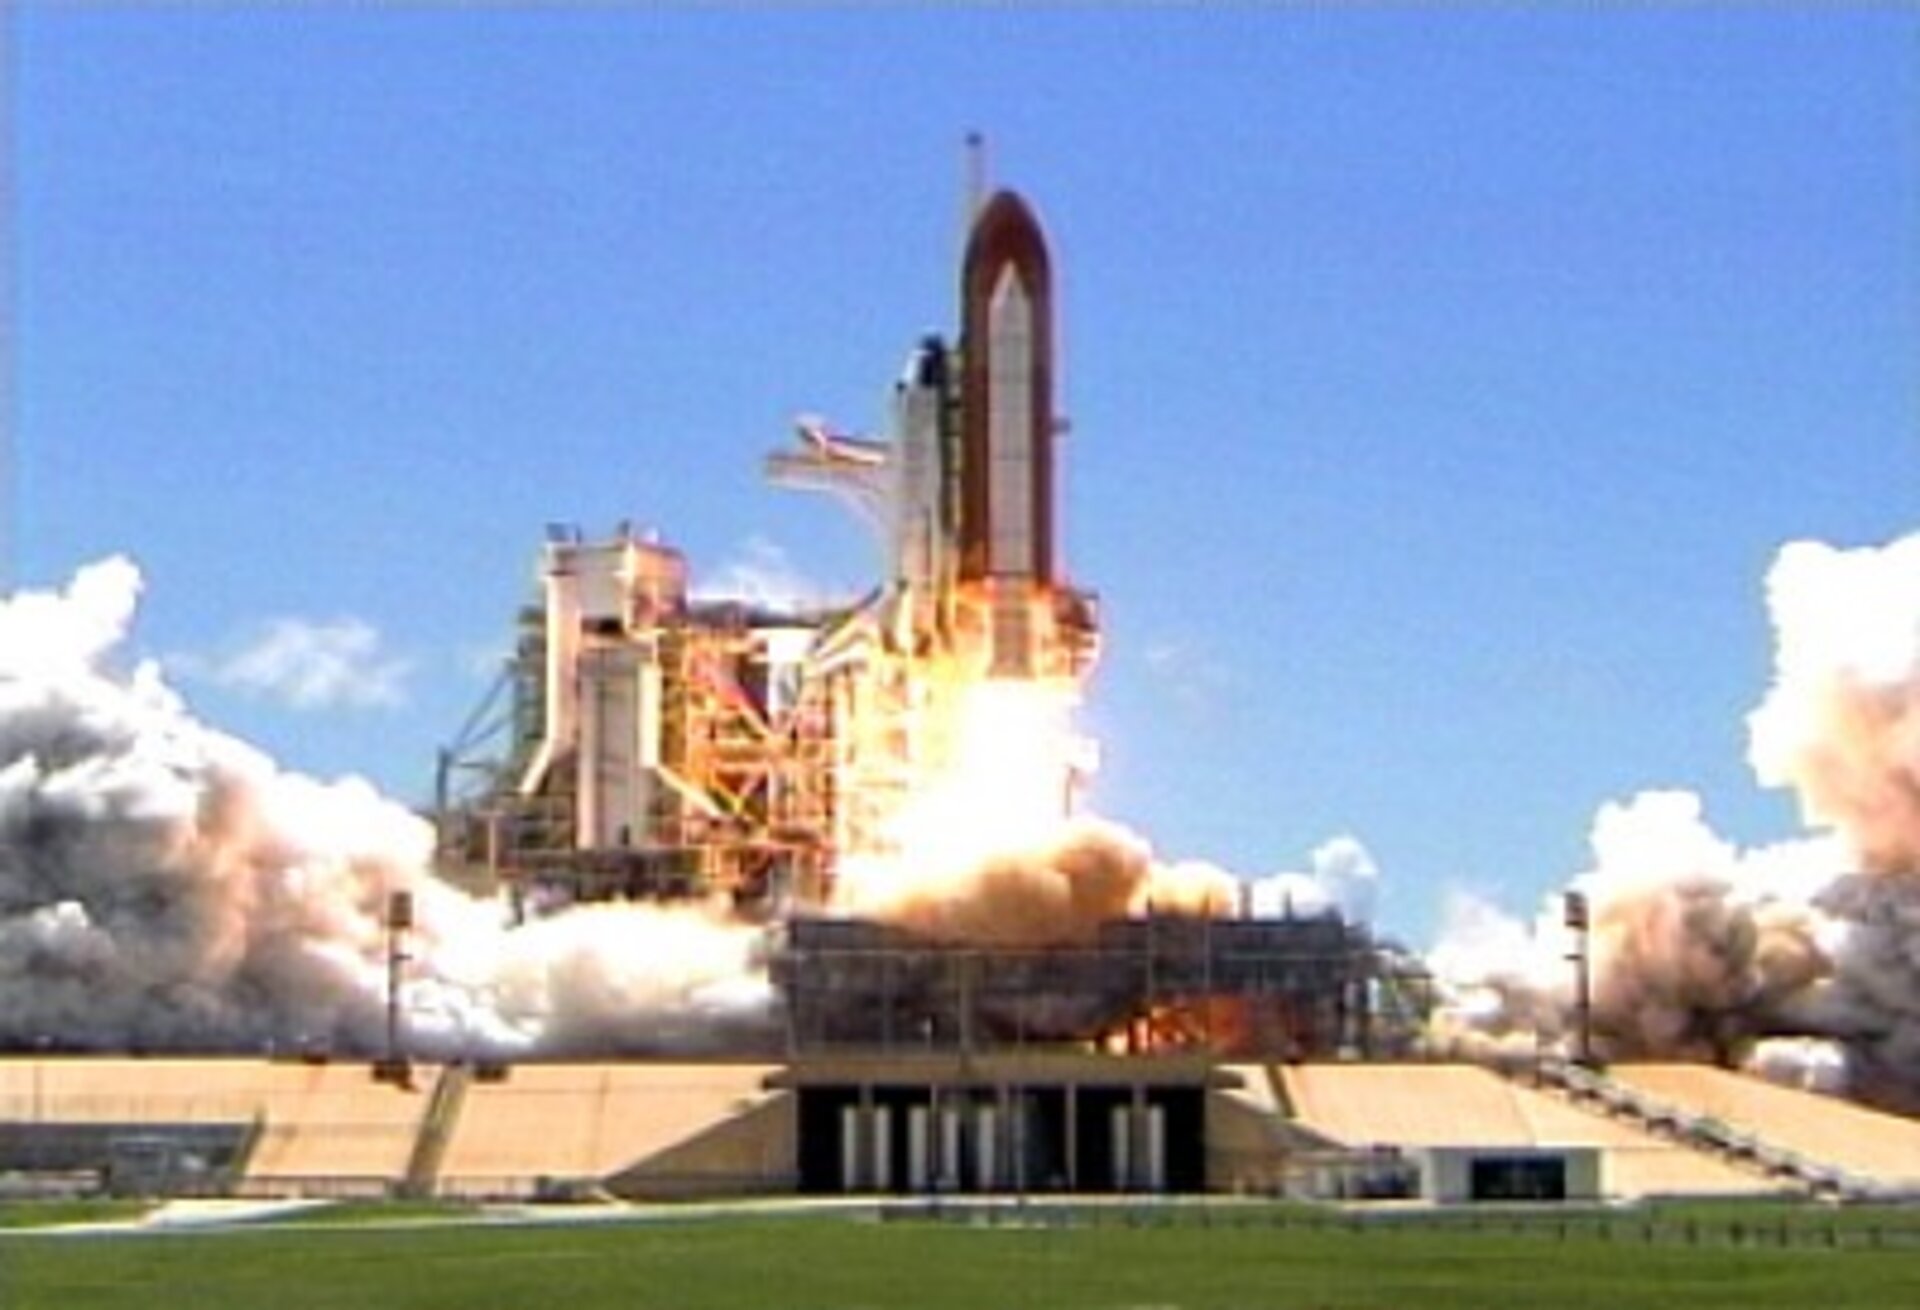 Lift-off of Space Shuttle Discovery at 20:38 CEST